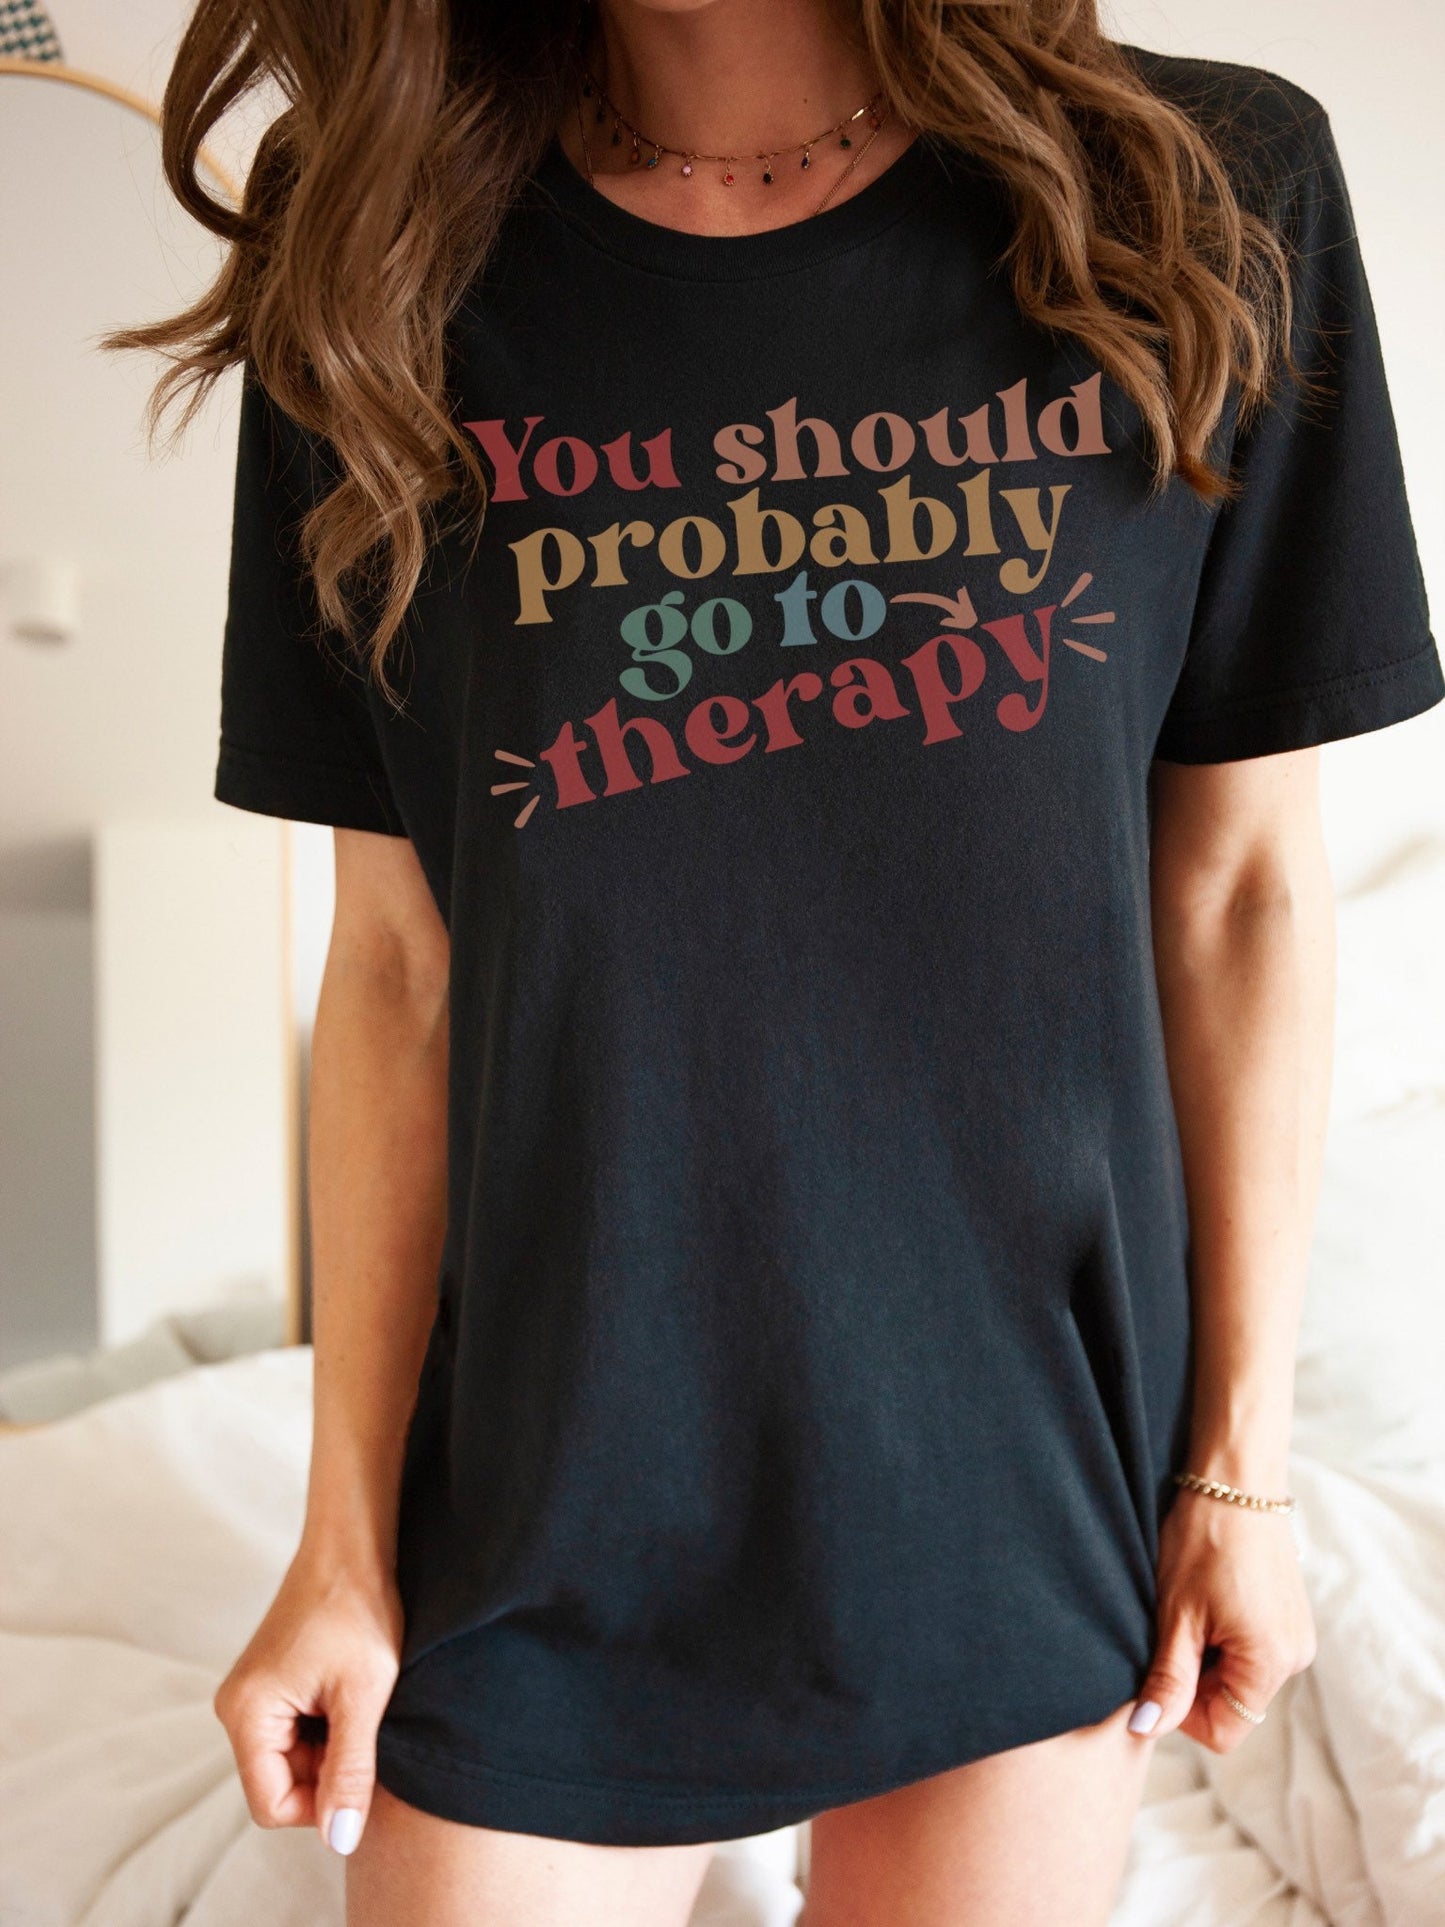 You Should Probably Go To Therapy Tshirt, Mental Health Matters Tee, Counselor Gifts, Psychologist Present, Gen Z Humor